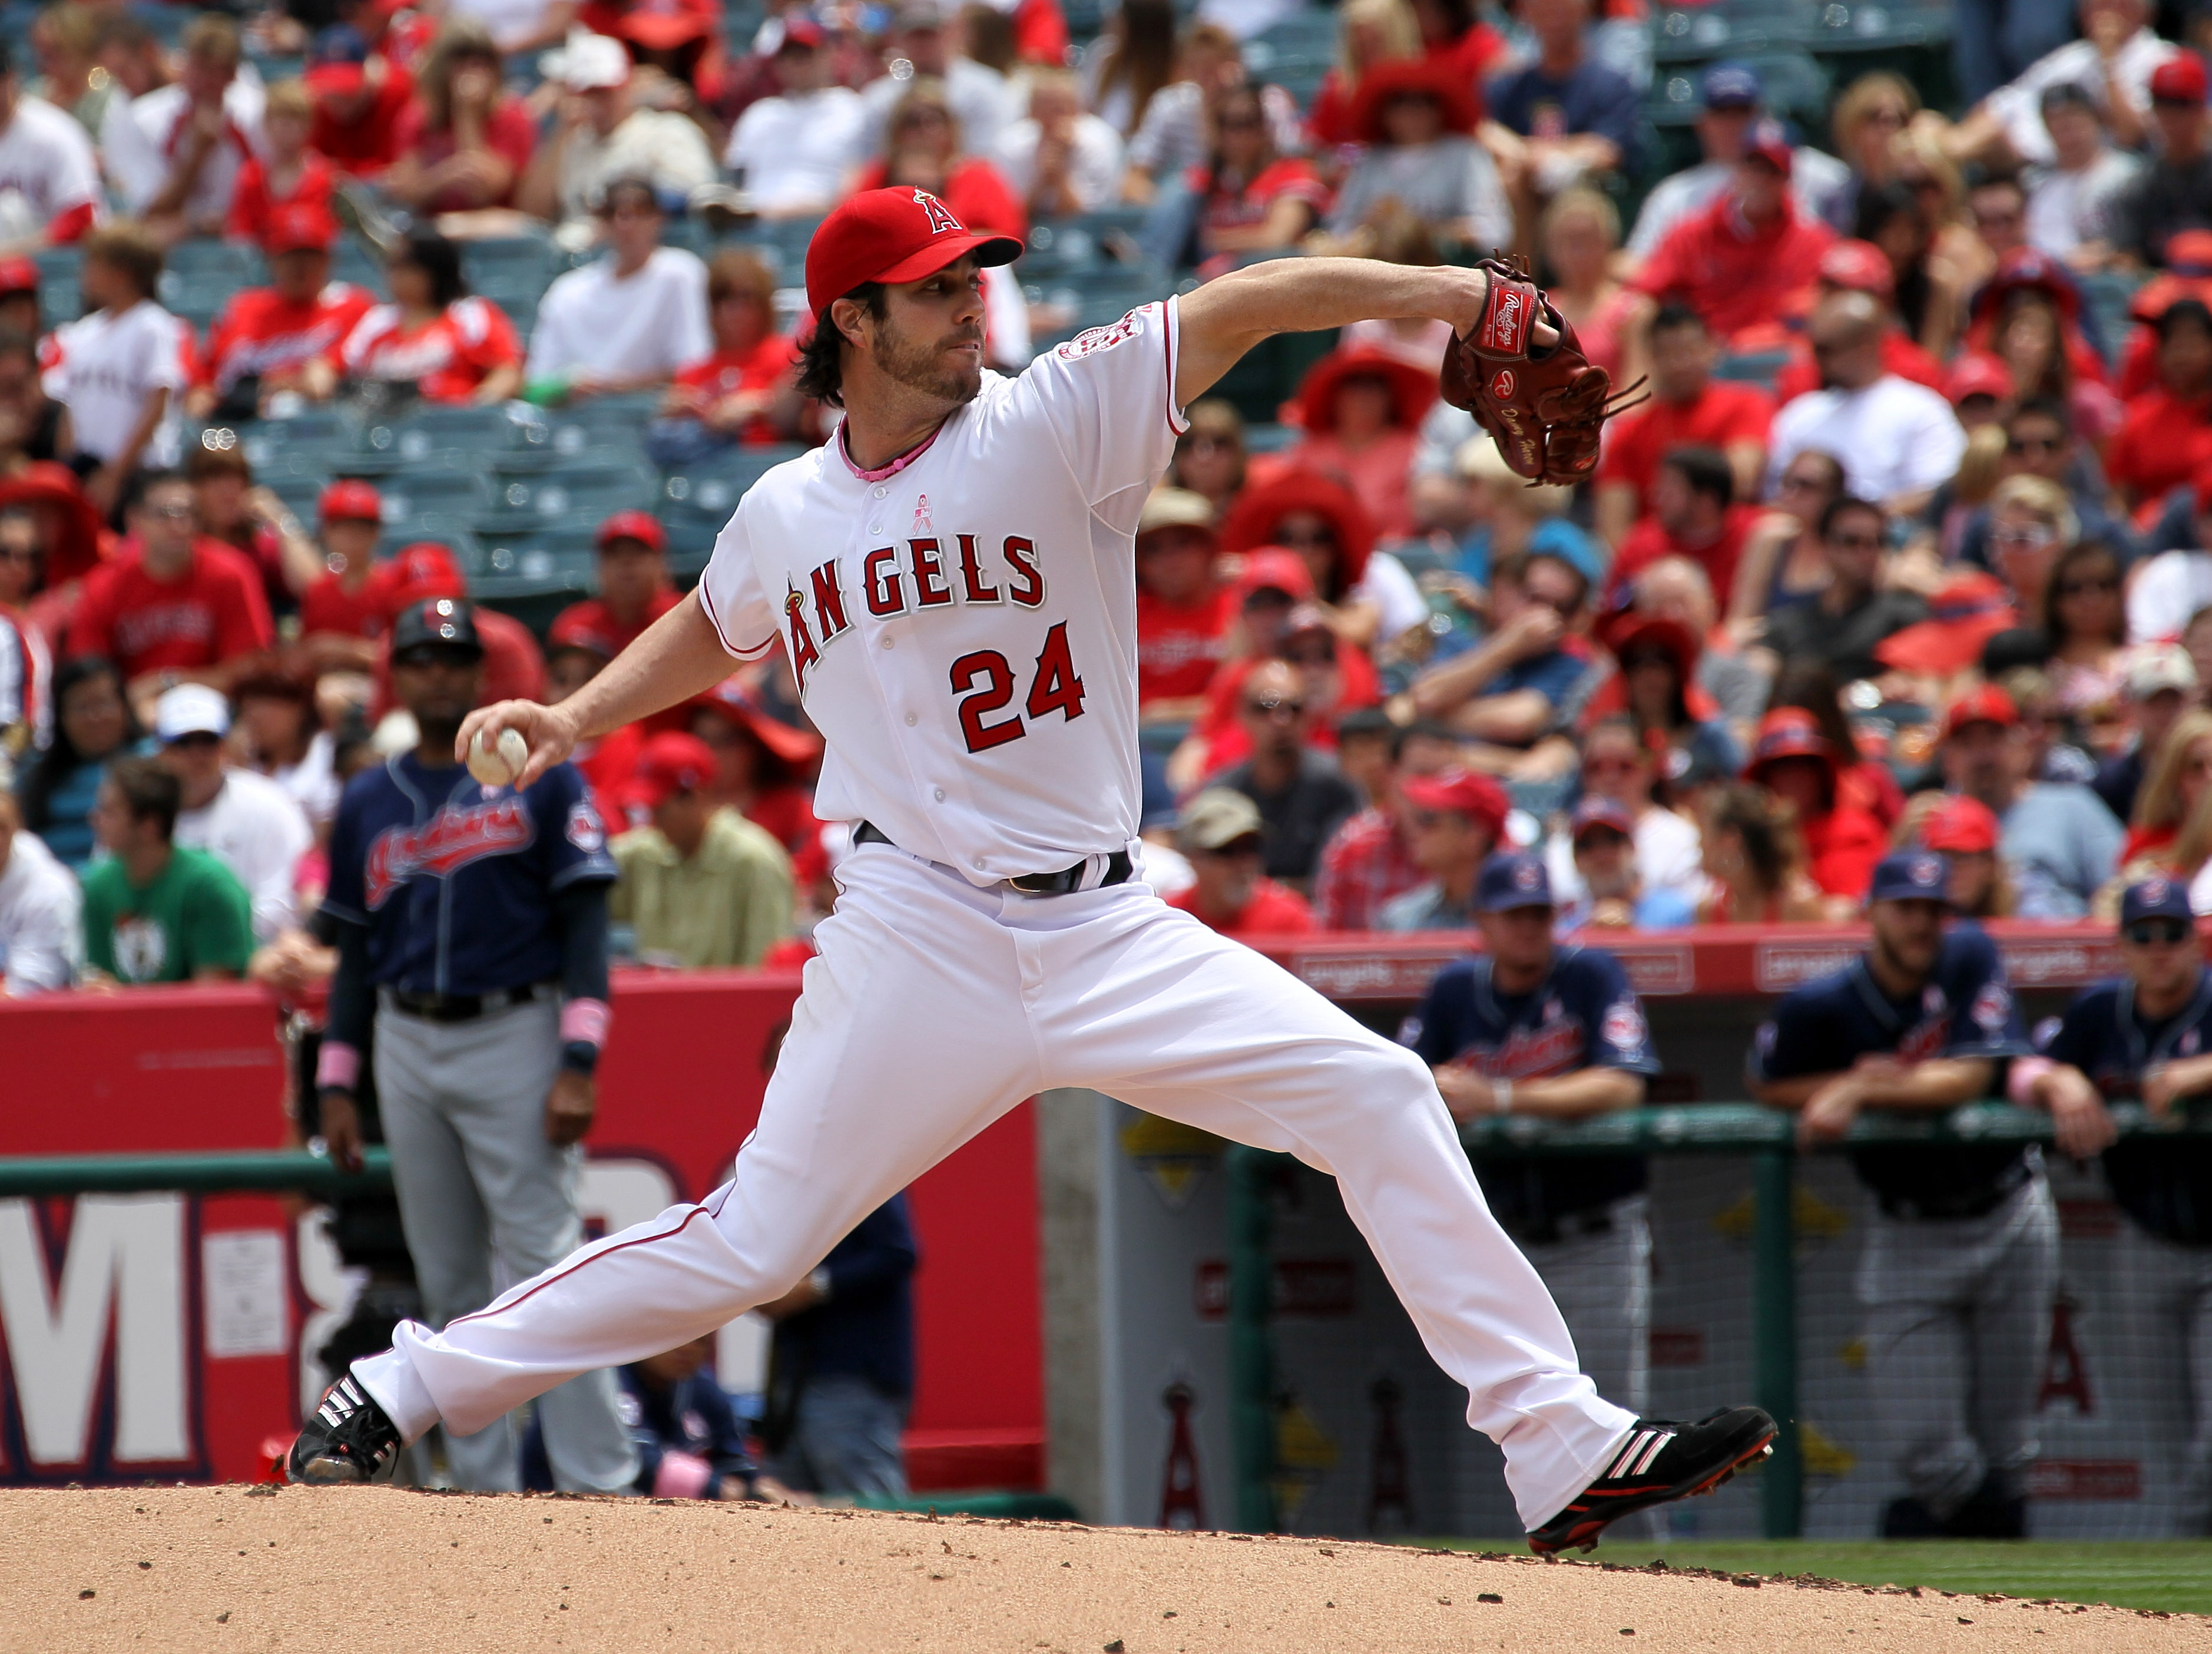 ANAHEIM, CA - MAY 08:  Dan Haren #24 of the Los Angeles Angels of Anaheim throws a pitch against the Cleveland Indians on May 8, 2011 at Angel Stadium in Anaheim, California.  (Photo by Stephen Dunn/Getty Images)